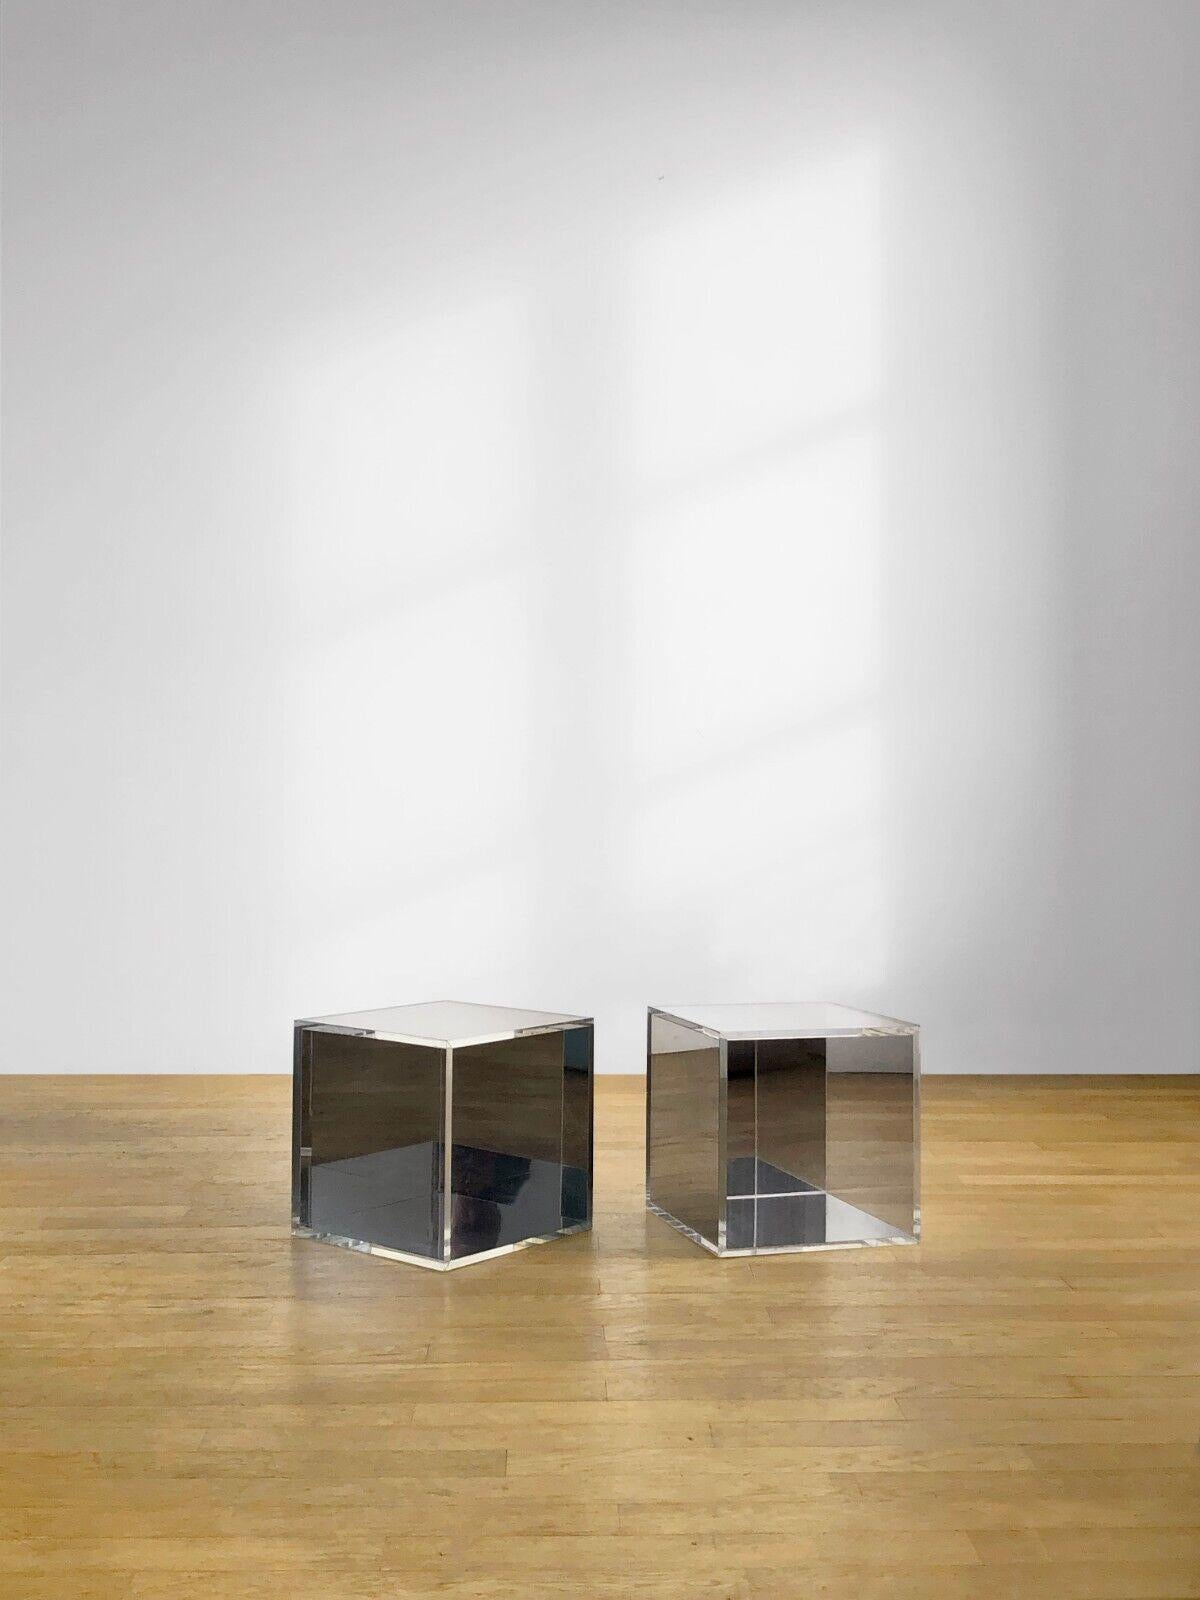 An astonishing pair of cubic coffee tables, bedside tables or end tables, Post-Modernist, Pop, Shabby-Chic, cubic structures in thick strips of Plexiglas, with 3 transparent sides and 3 mirrored sides, creating an infinity of optical and shimmering